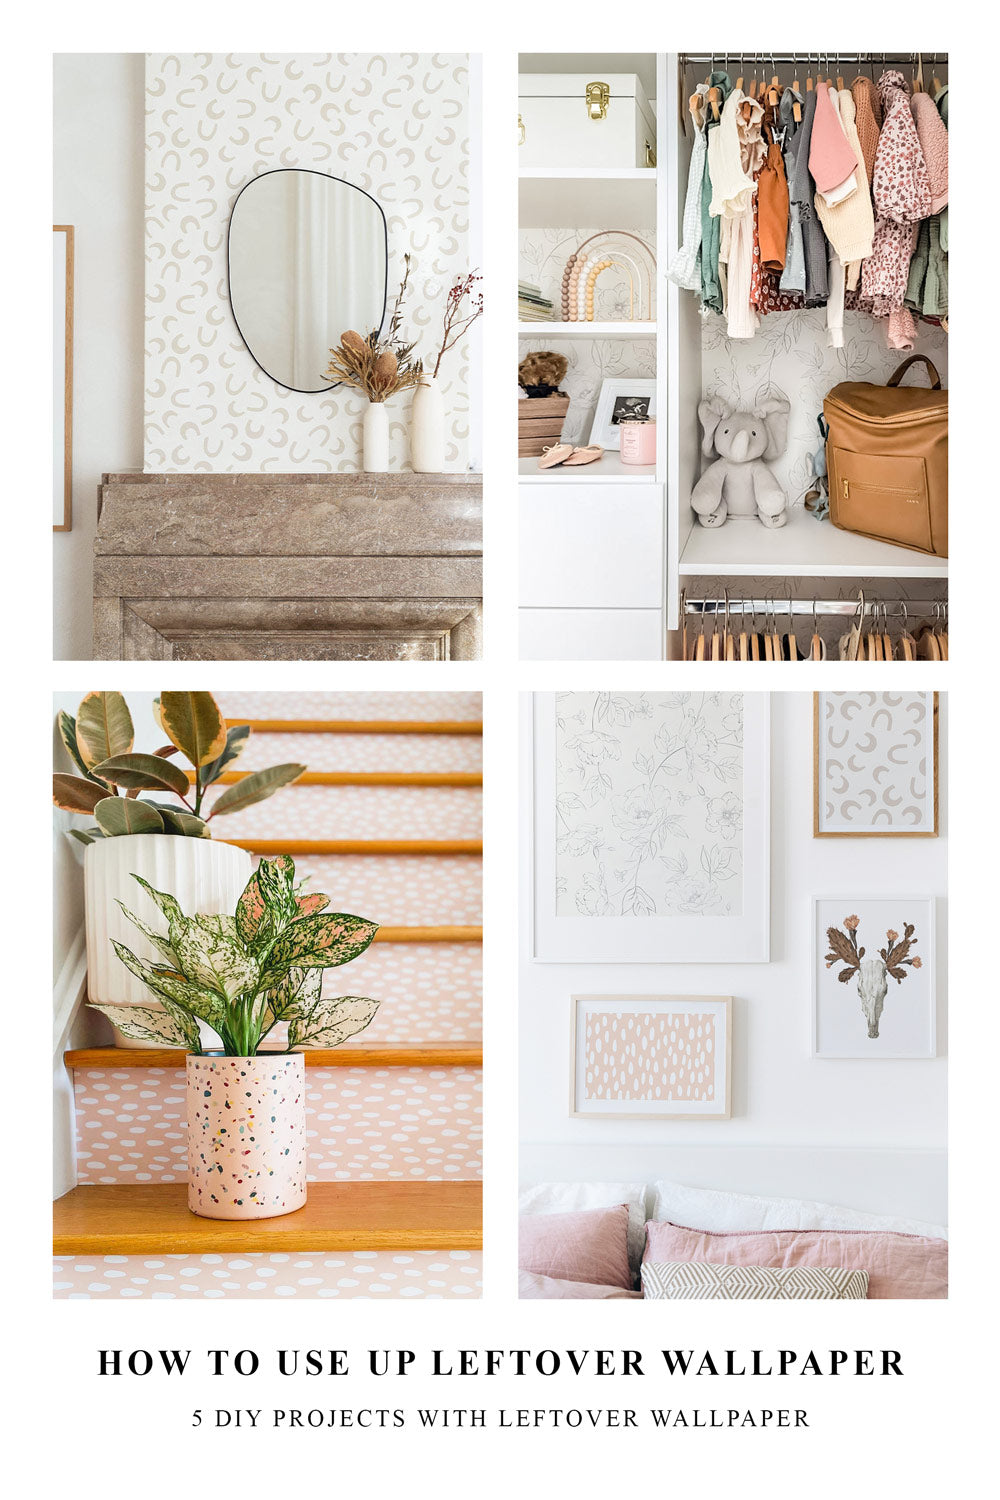 DIY projects with leftover wallpaper